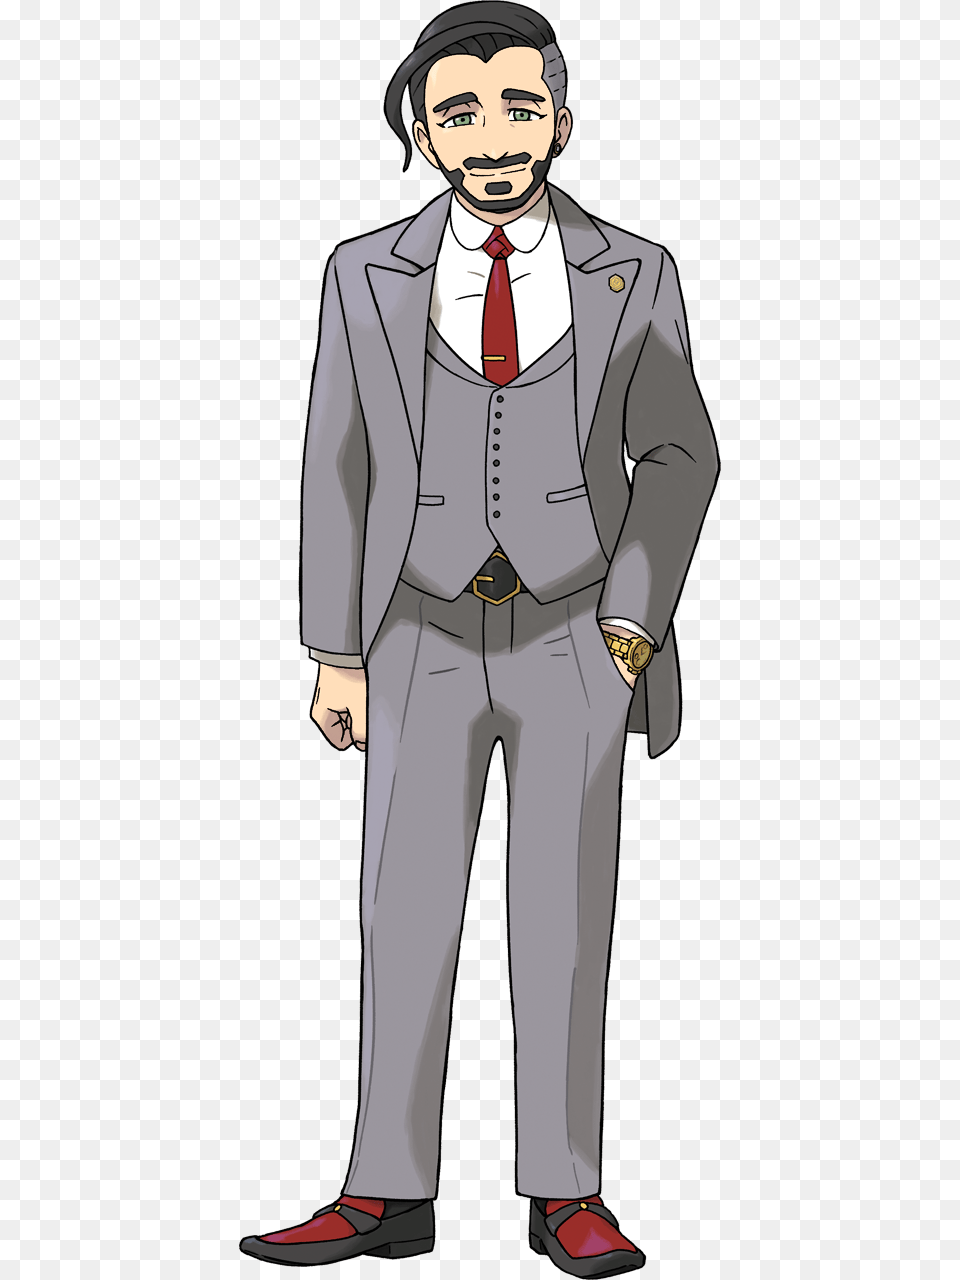 Pokemon Sword And Shield Rose, Clothing, Suit, Formal Wear, Adult Png Image